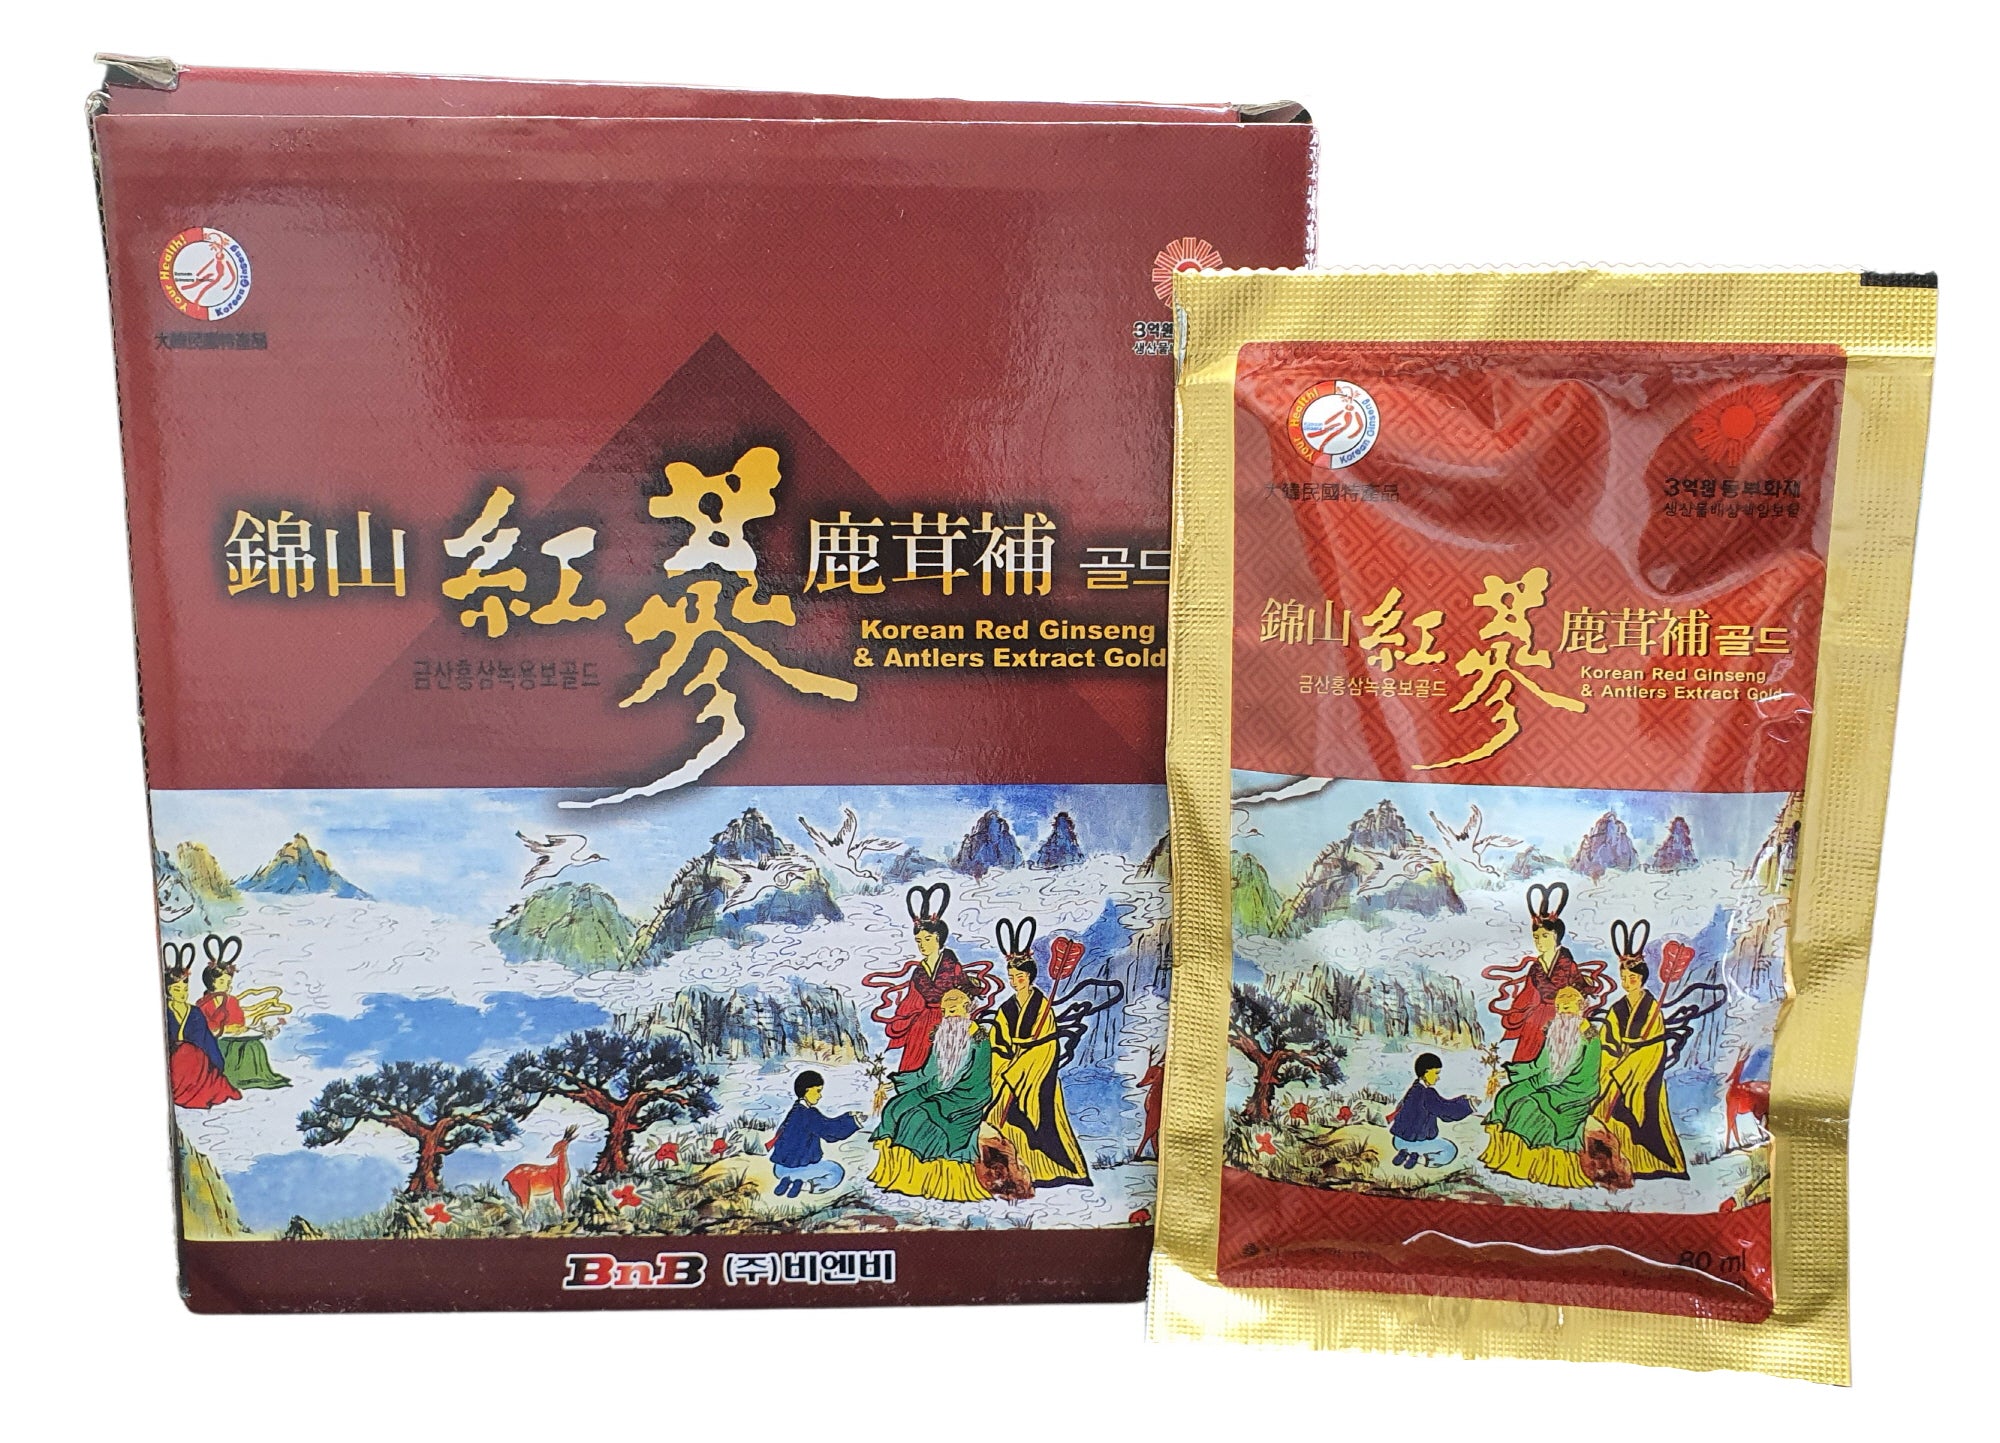 Korean Red Ginseng Antlers Extract Gold Drink Health Foods Supplements